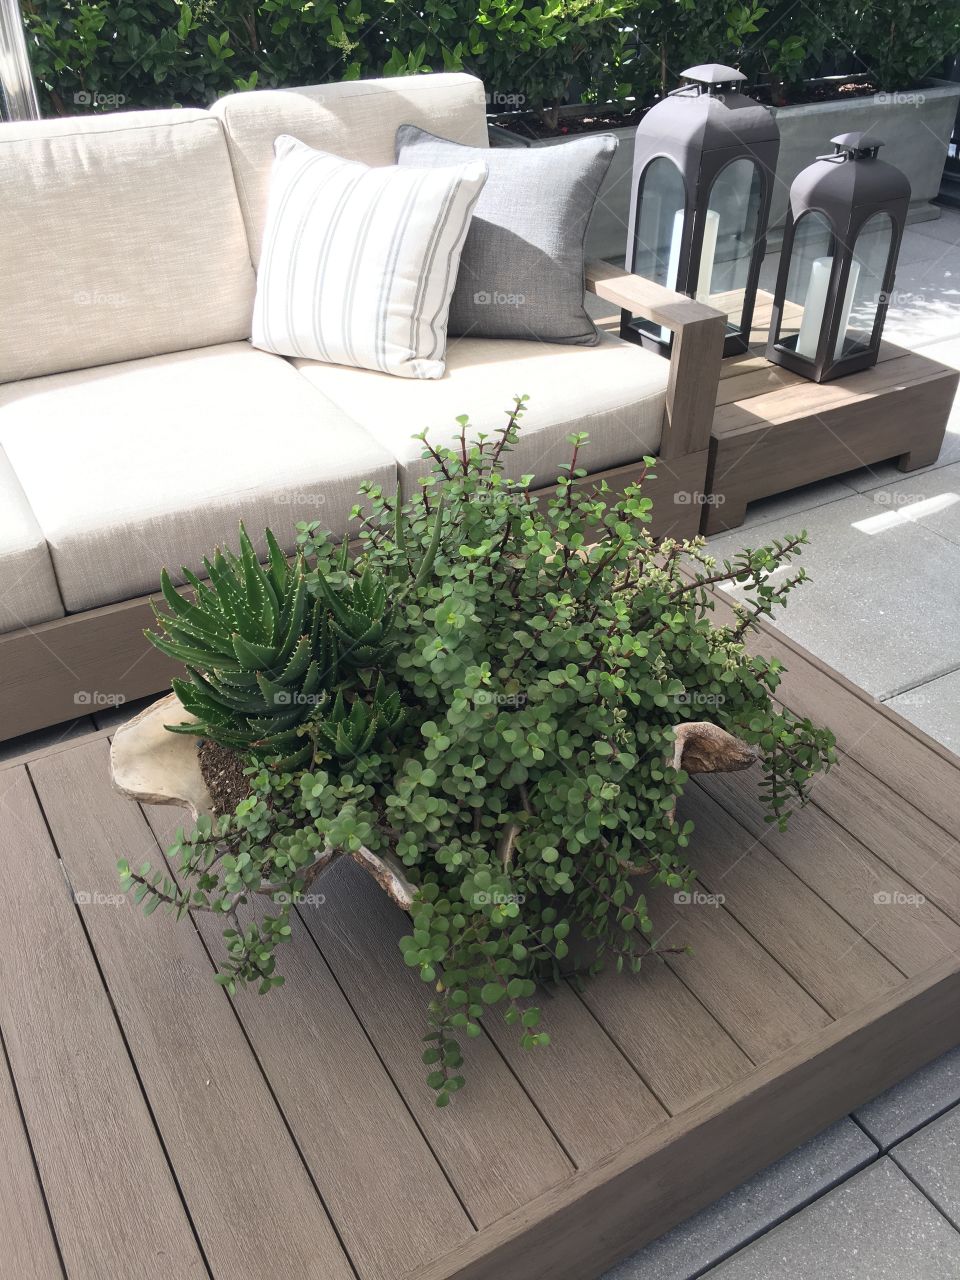 Large shell contains an assortment of succulents on a table in an outdoor living area